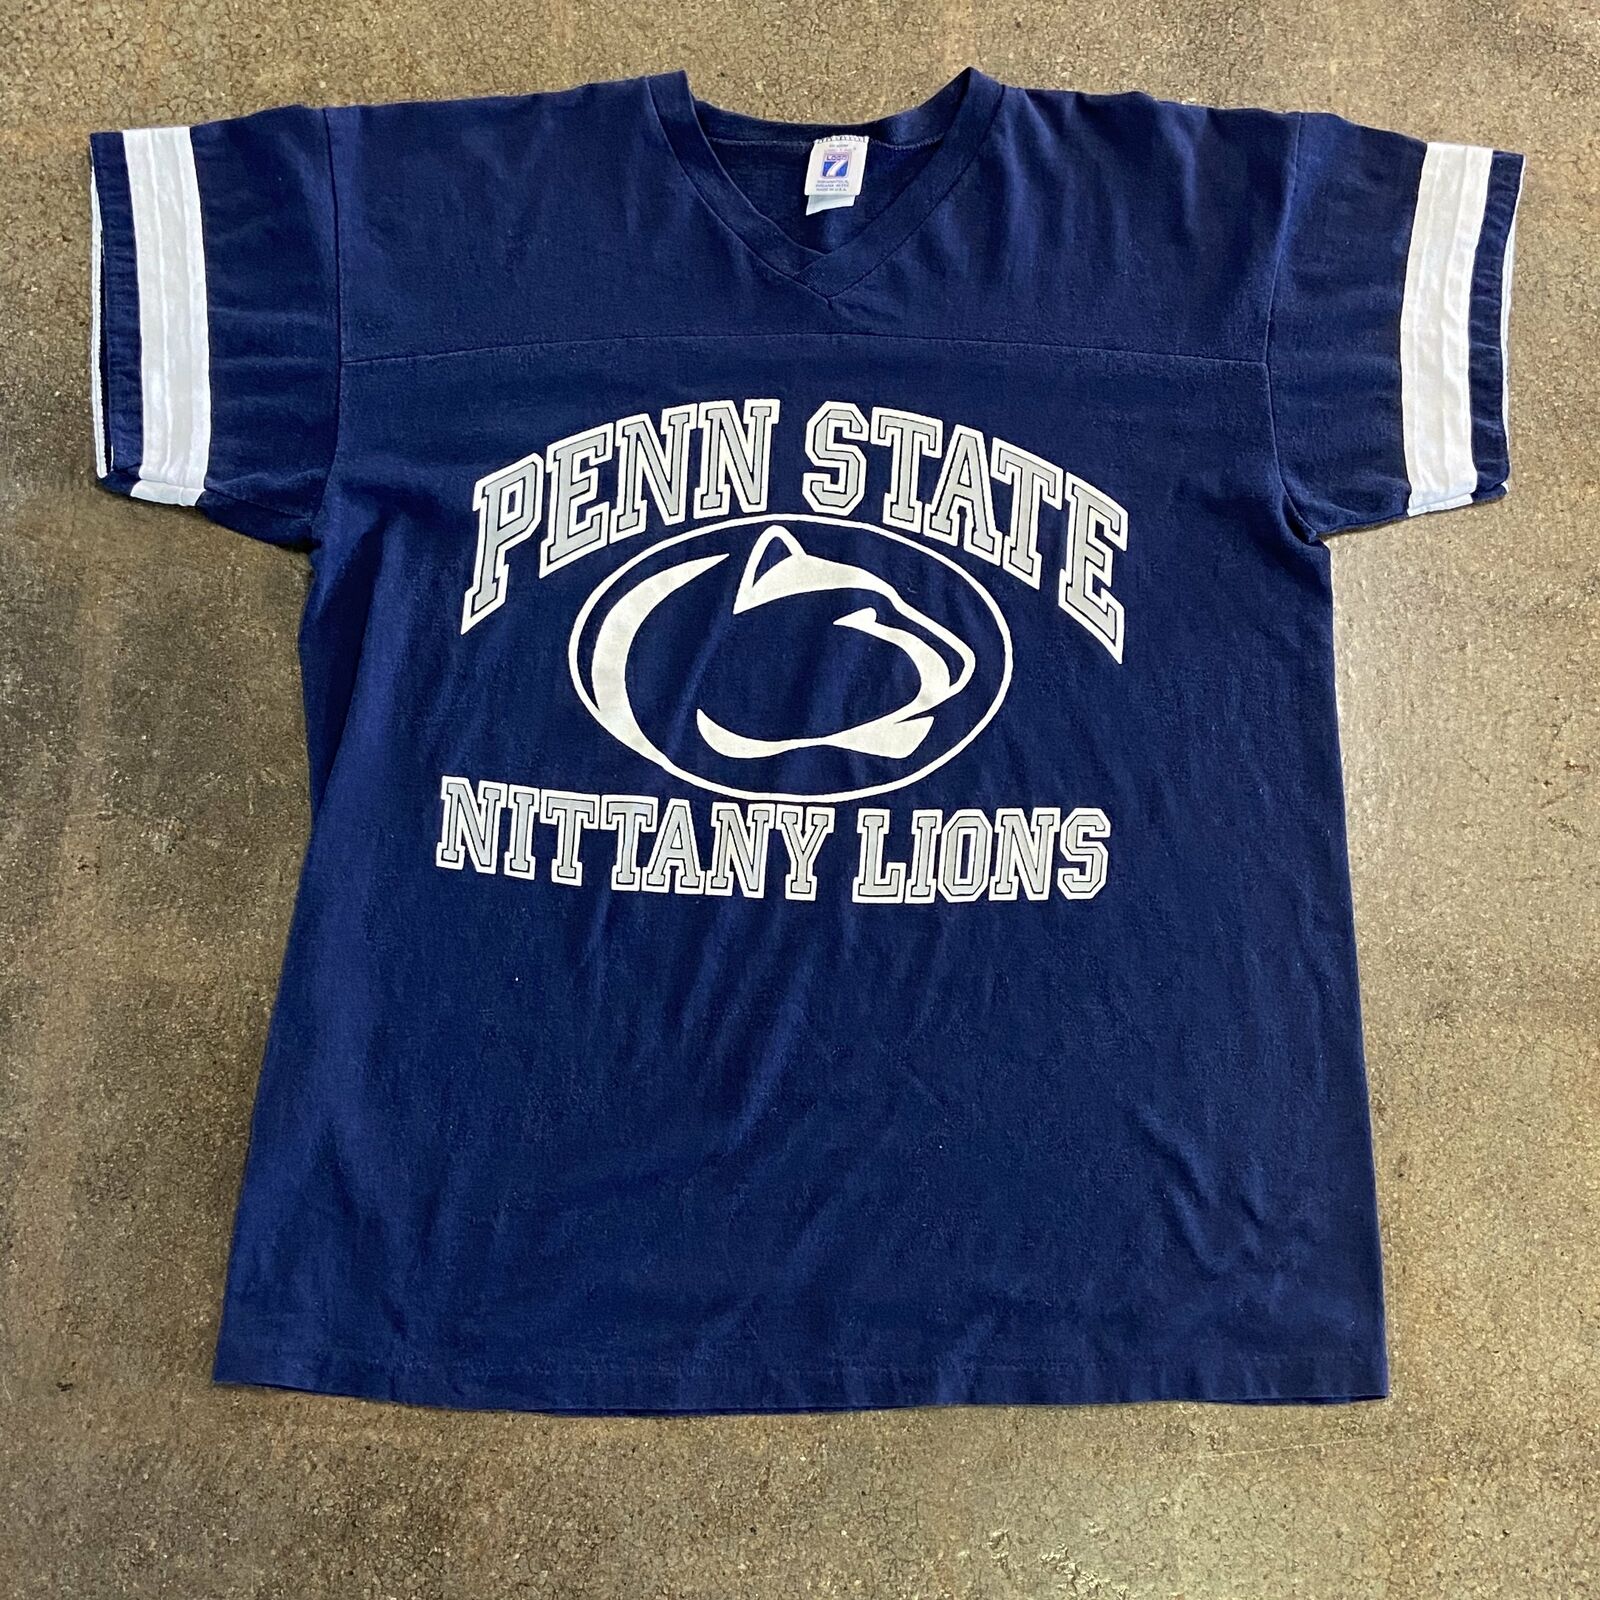 Vintage Logo 7 Penn State Nittany Lions NCAA Blue T-Shirt Adult Size M USA Made*